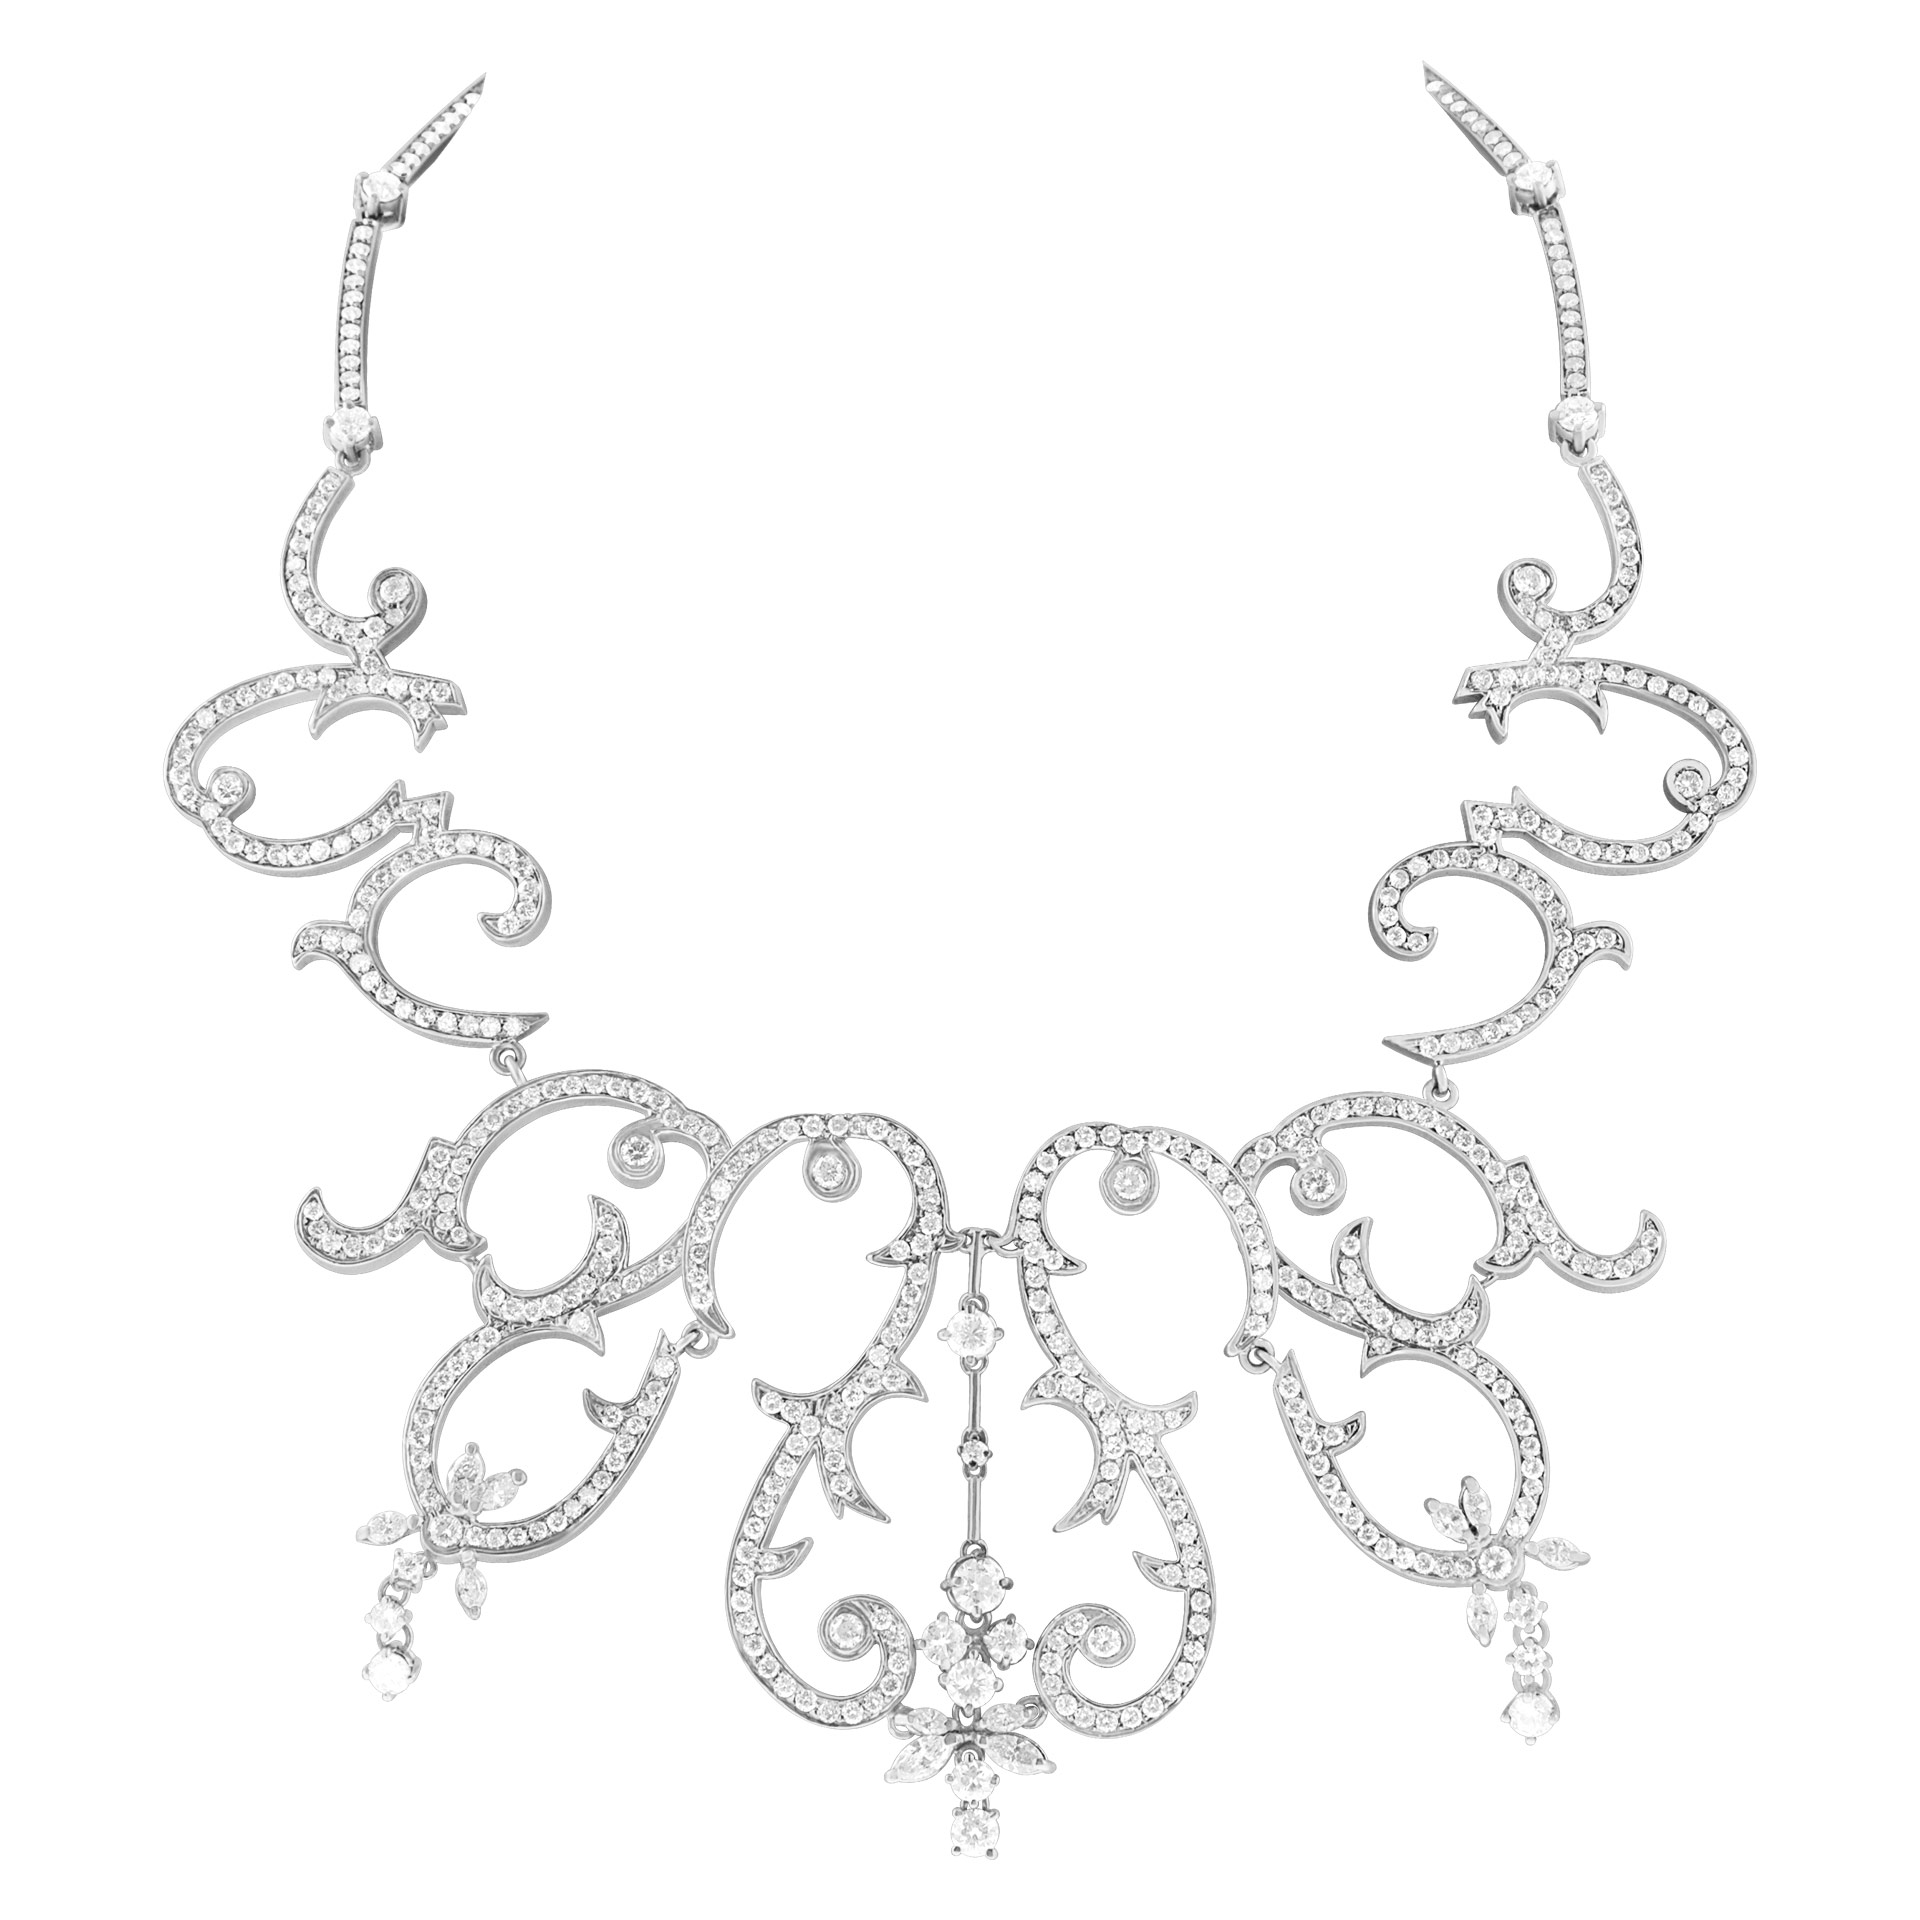 Retro-design "Elizabeth Taylor" style diamond necklace in 14k white gold. Approx 23.75 carats.